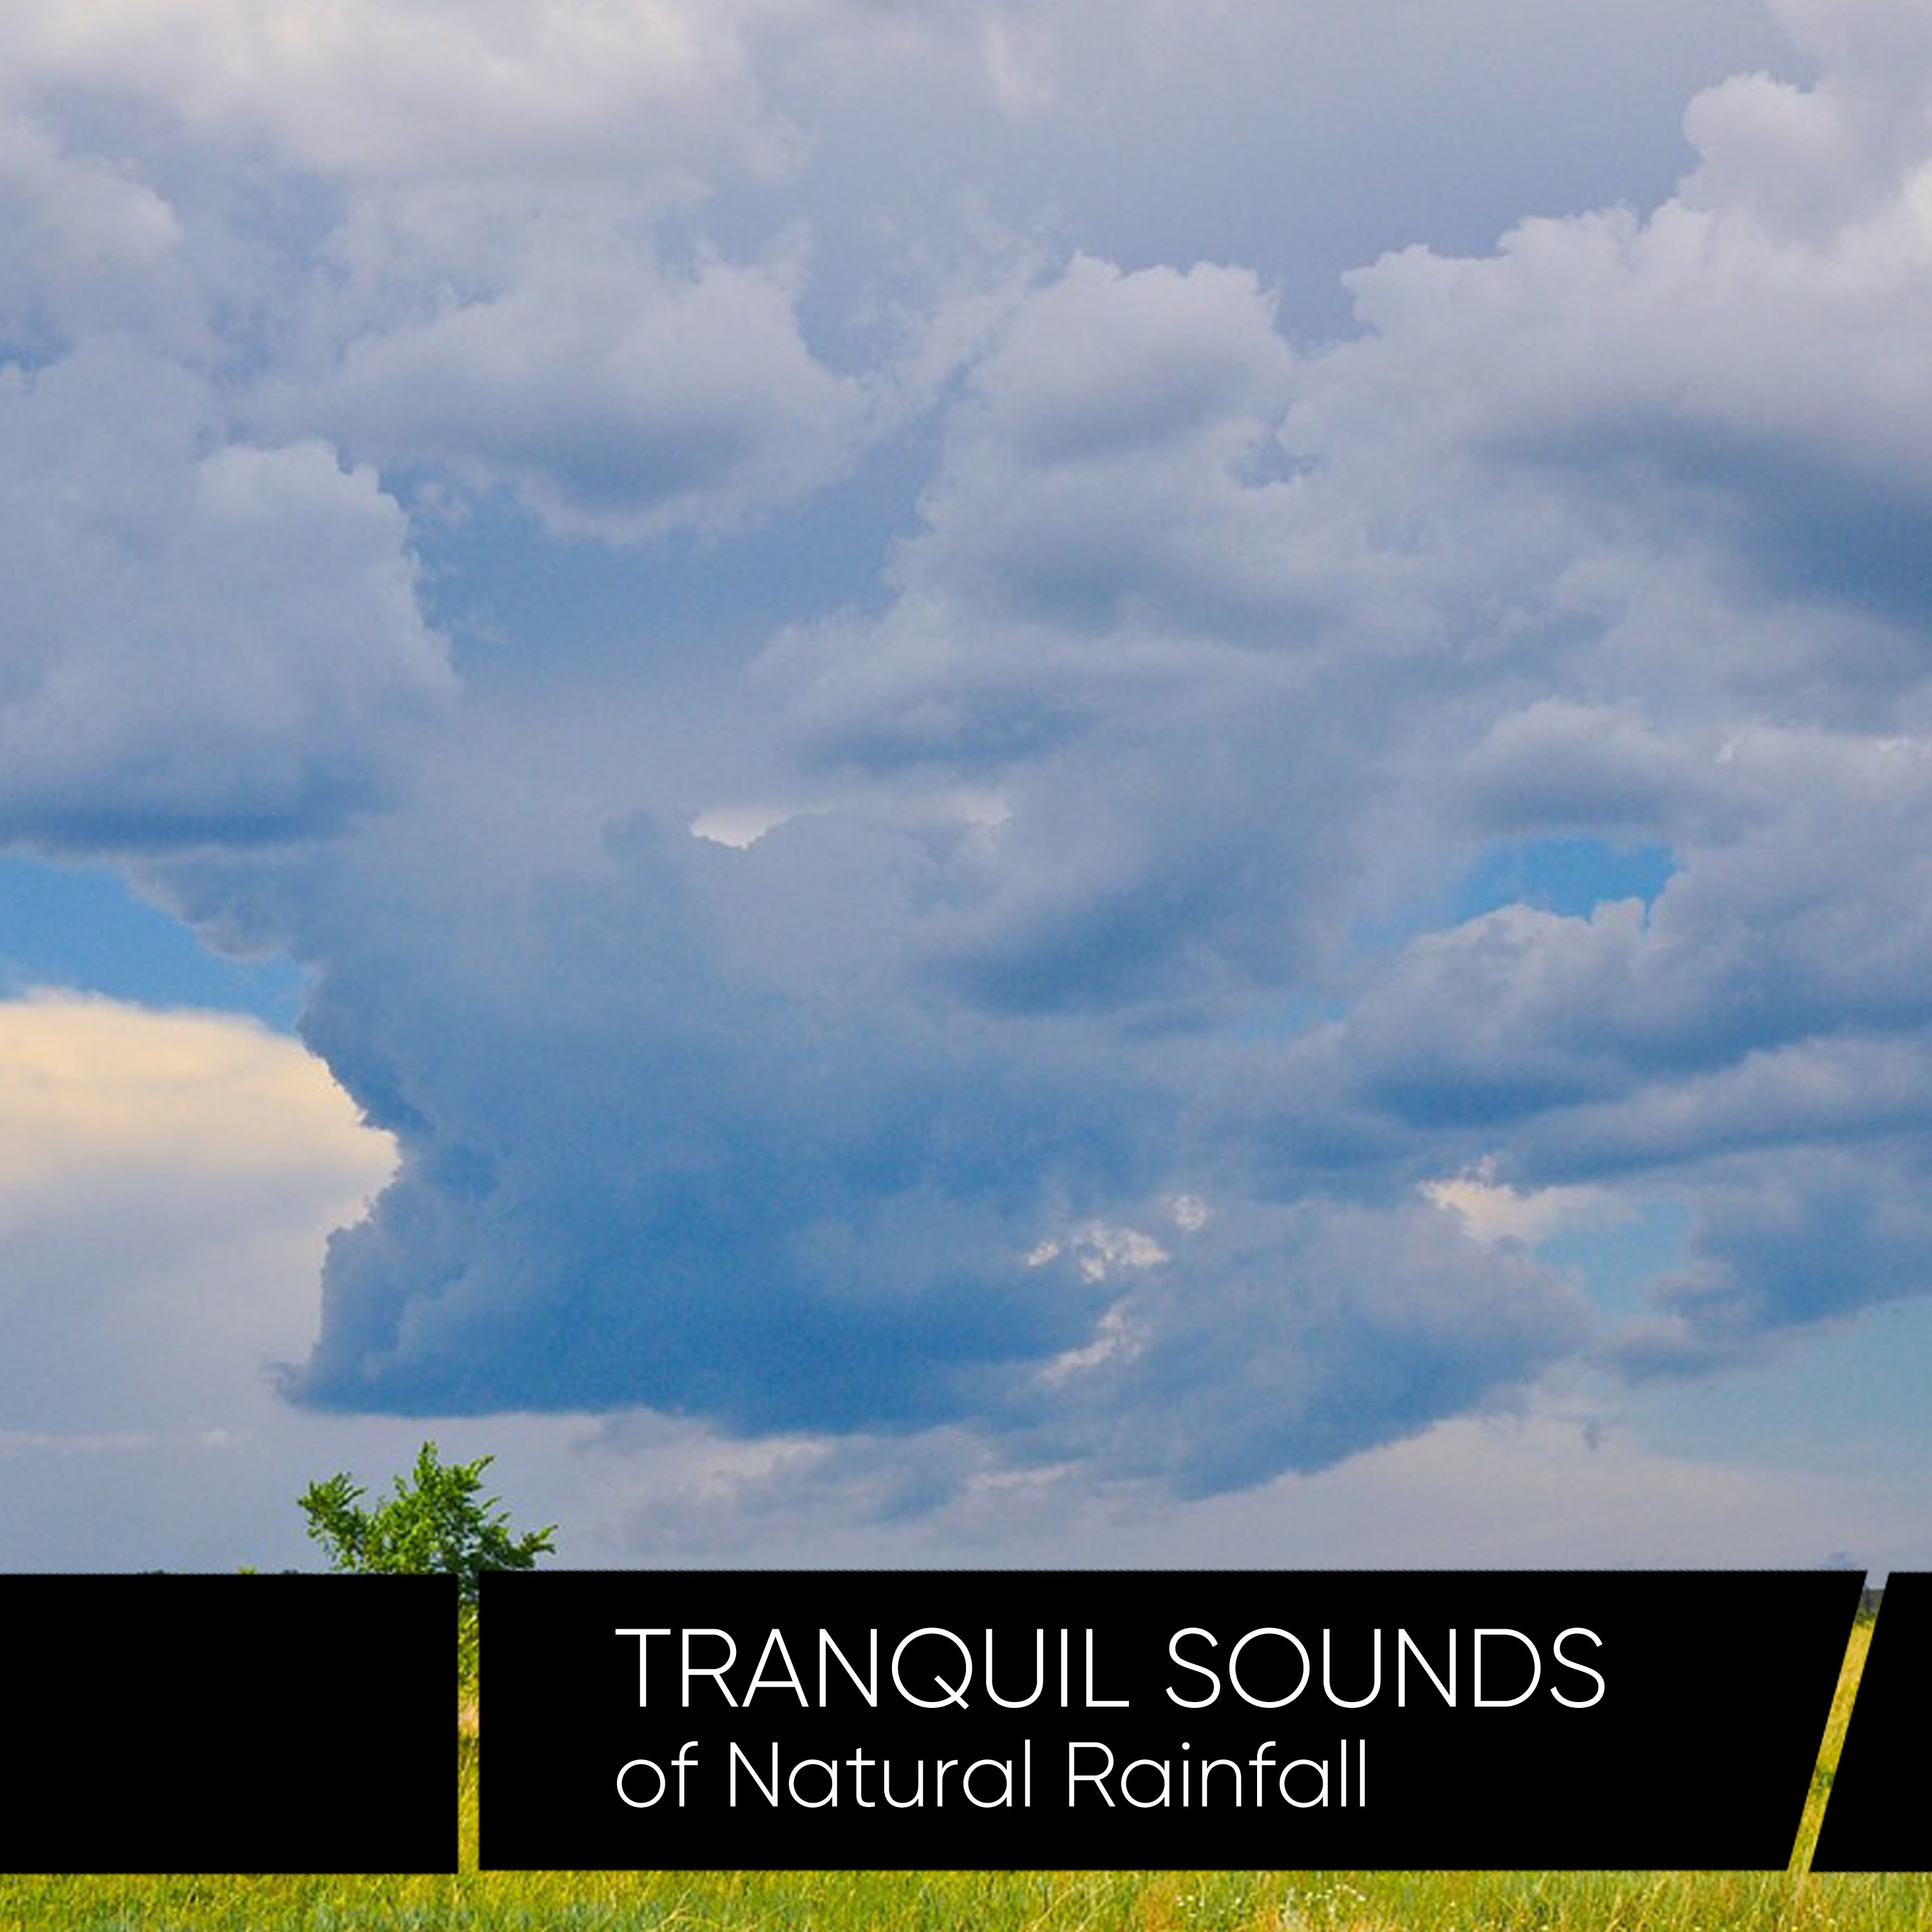 Tranquil Sounds of Natural Rainfall